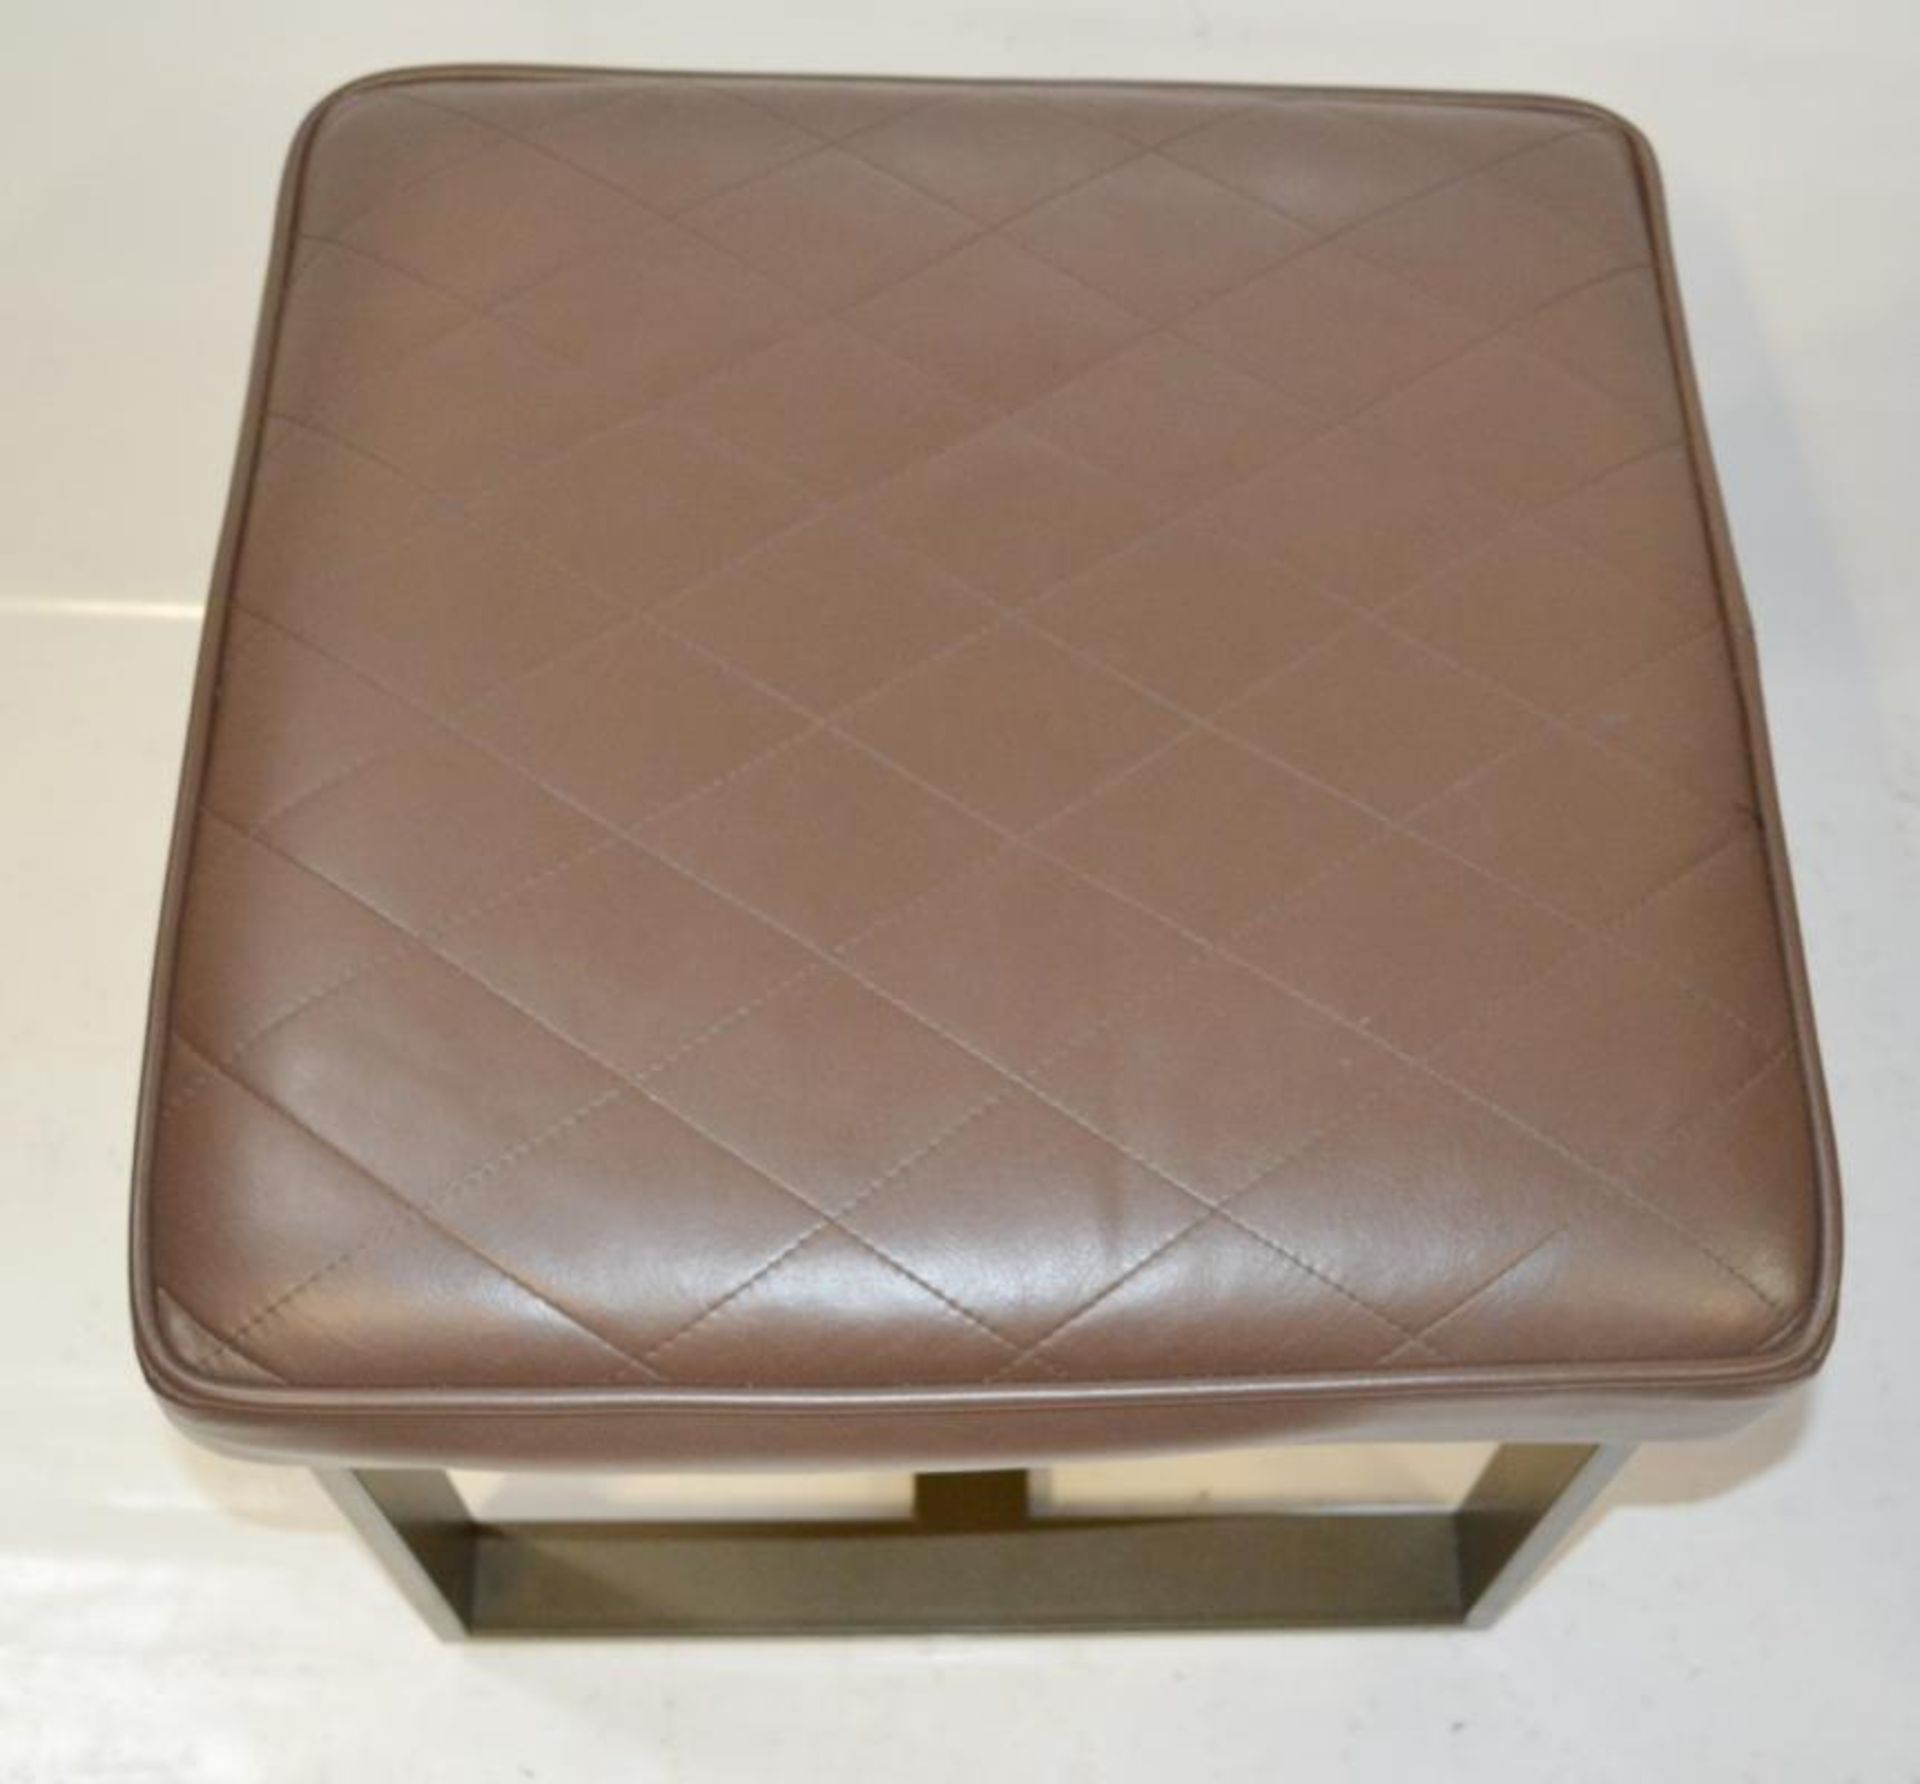 8 x Contemporary Seat Stools With Brown Faux Leather Cushioned Seat Pads - Recently Removed From - Image 2 of 6